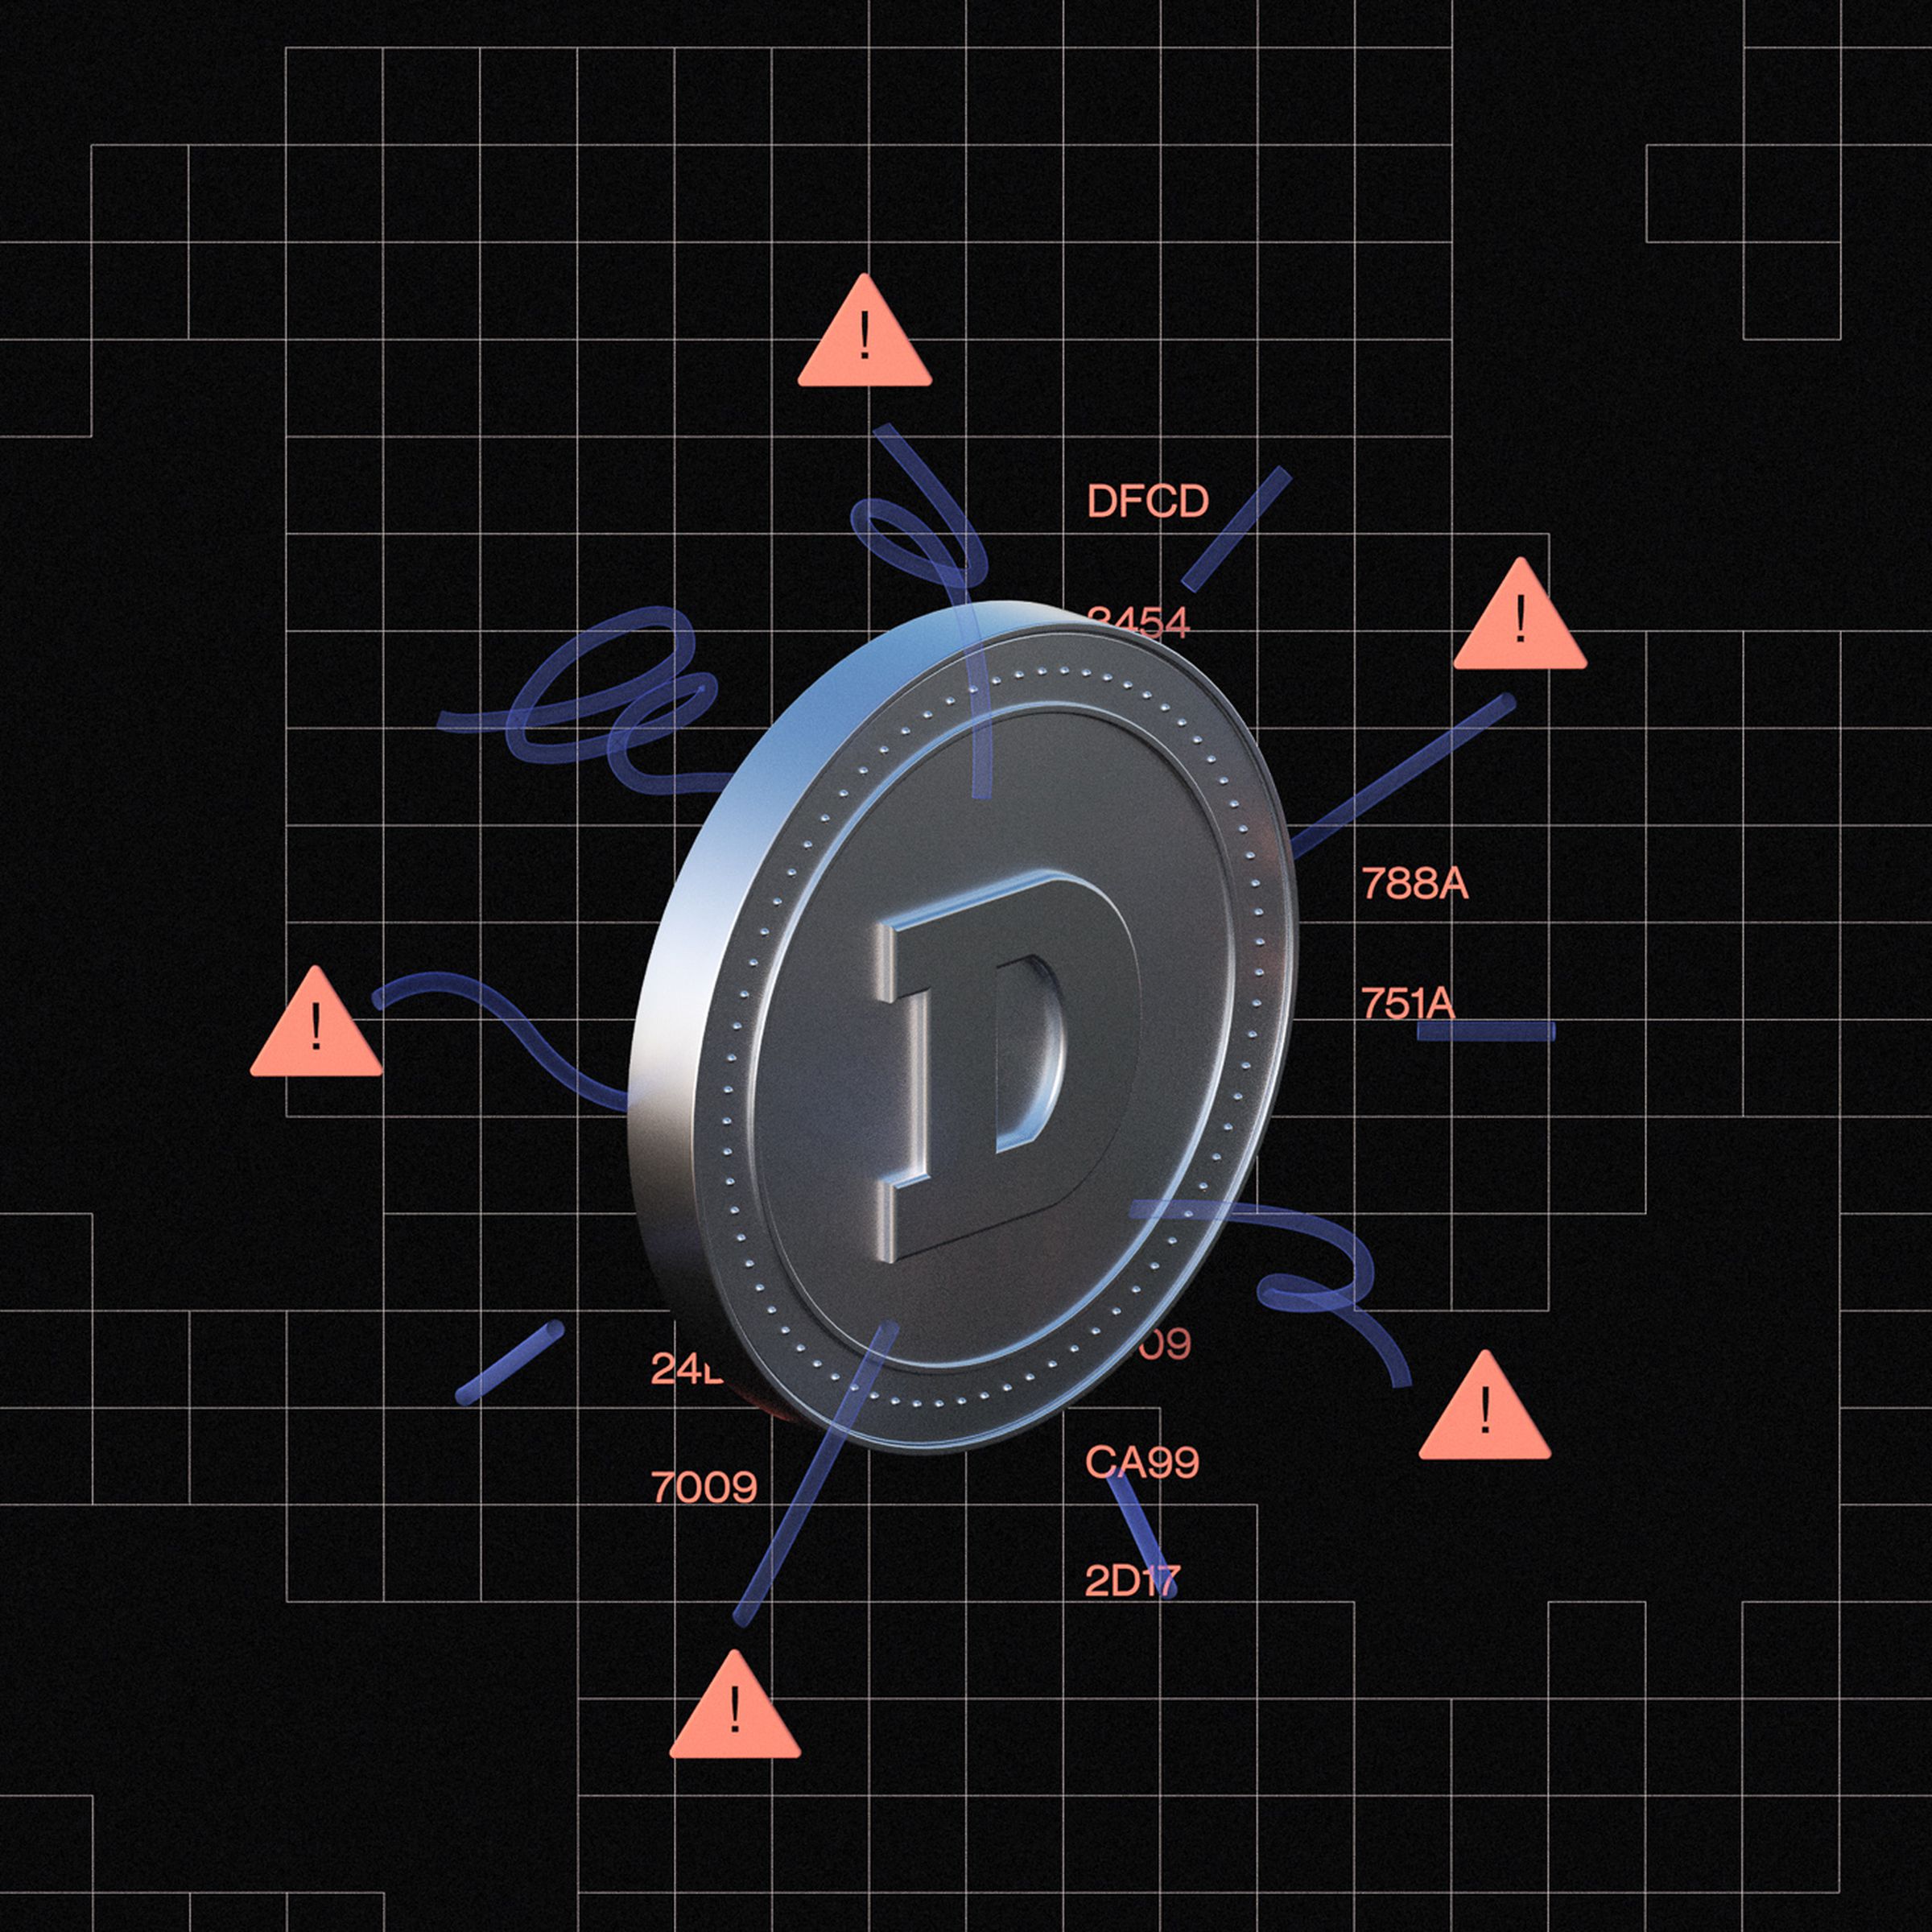 An illustrated Dogecoin surrounded by warning signs.